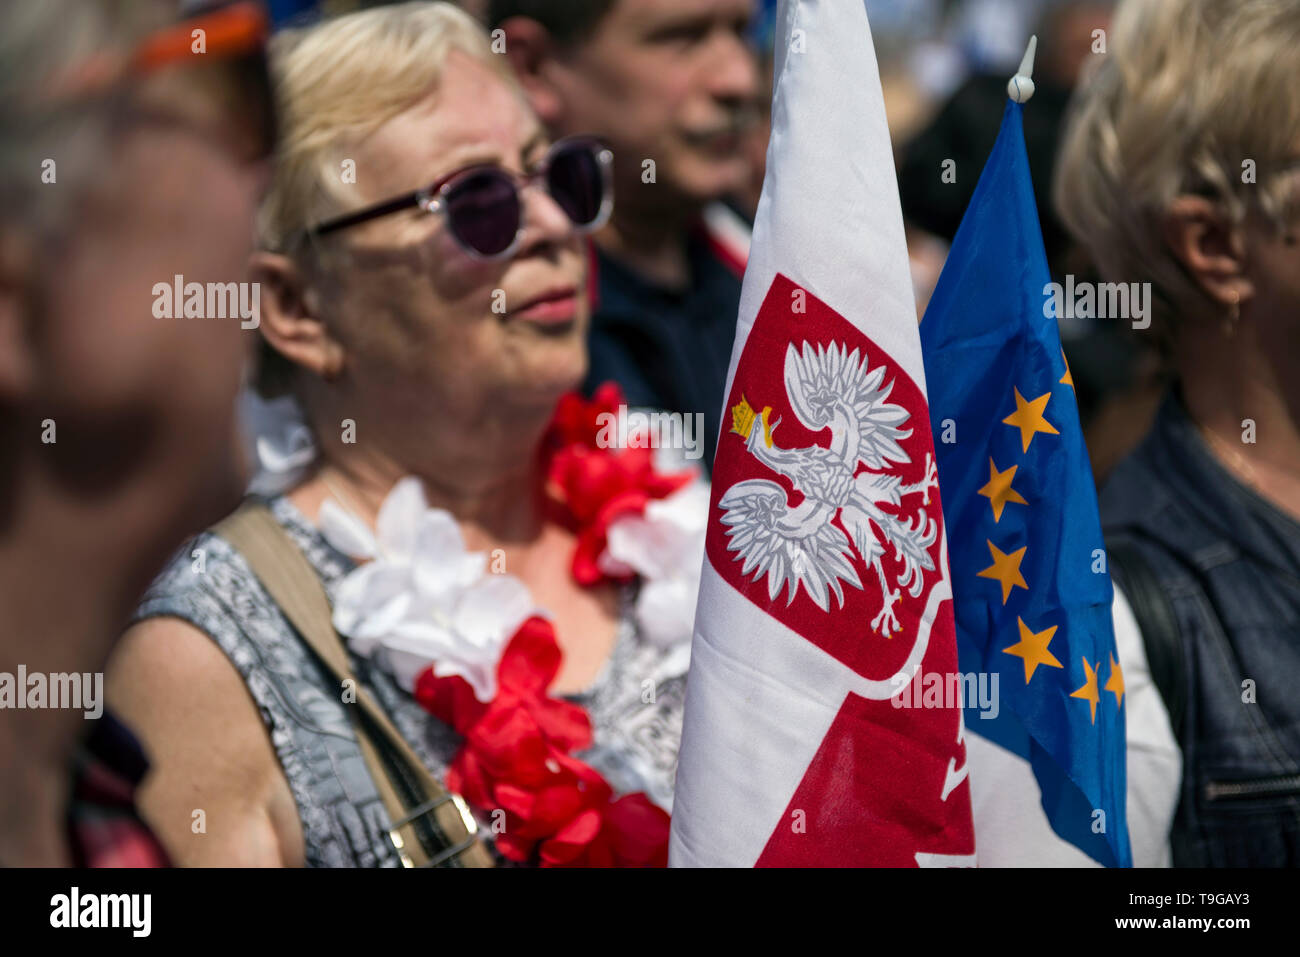 People seen with EU and Polish flags during the march. The march 'Poland in Europe' (Polska w Europie), was organized by the European Coalition (Koalicja Europejska) an alliance of political parties. The march was led by the leaders of the opposition parties and the President of the European Council, Donald Tusk. Unofficially, the March for Europe gathered about 45 thousand people. Stock Photo